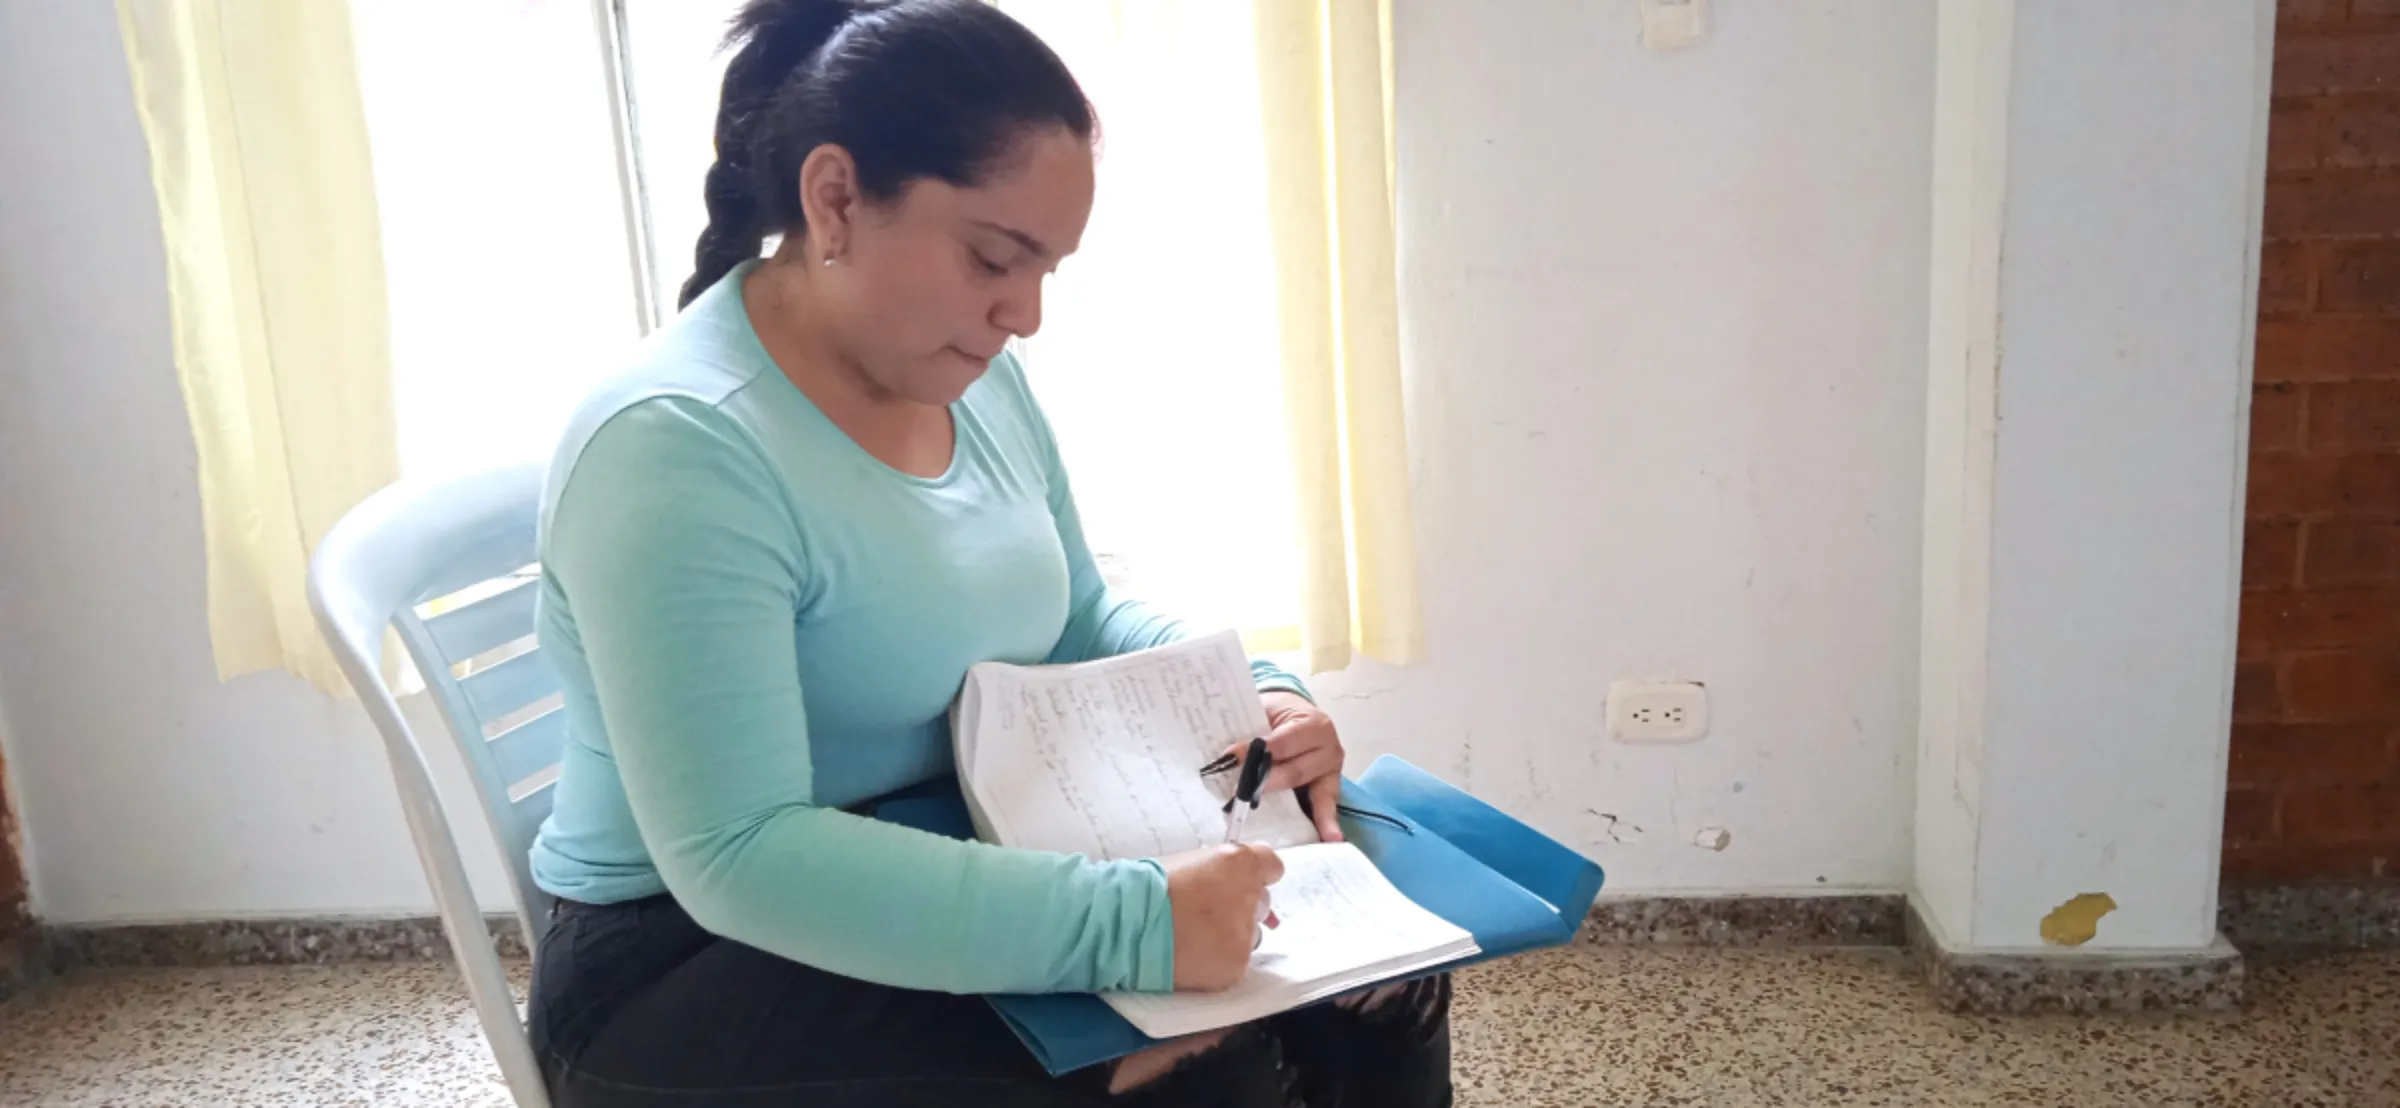 Venezuelan migrant Mairelys Caldera takes notes after attending a financial literacy and entrepreneurship workshop in Bogota, Colombia. June 14, 2023